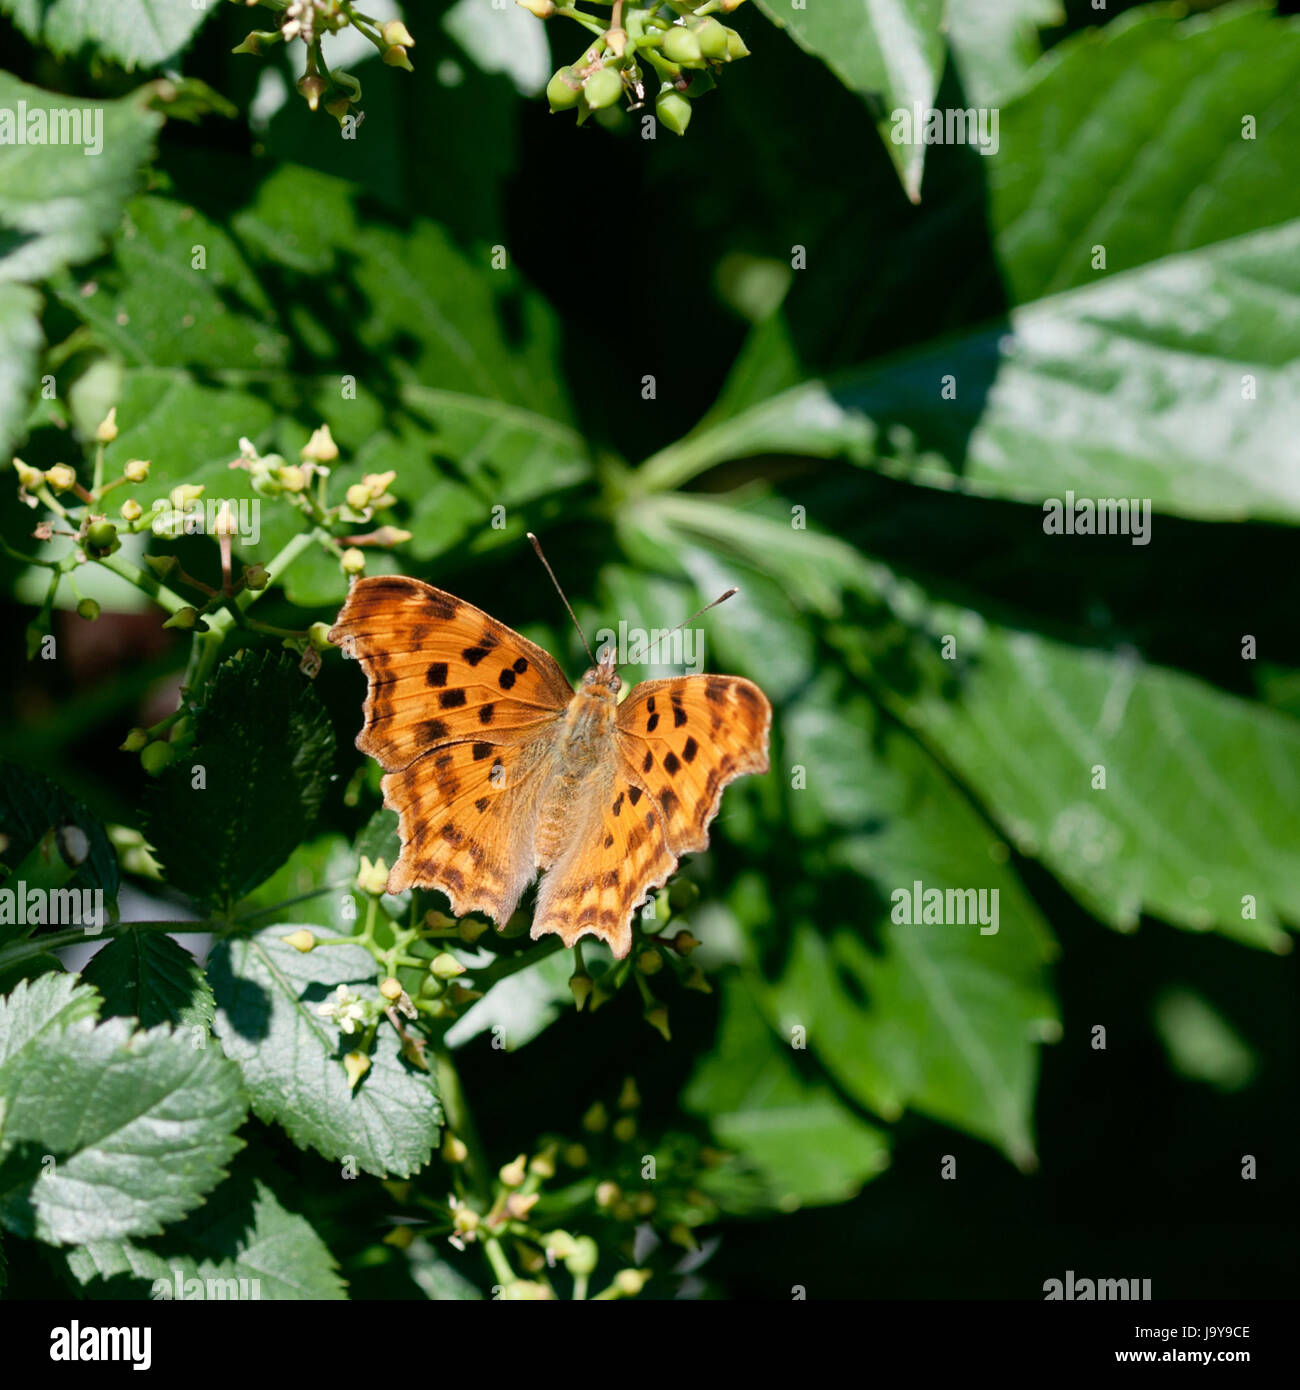 Der Kaisermantel (Argynnis paphia) ist ein Schmetterling (Tagfalter) aus der Familie der Edelfalter (Nymphalidae). Argynnis paphia is a common and variable butterfly found over much of the Palaearctic ecozone – Algeria, Europe, temperate Asia and Japan. Stock Photo